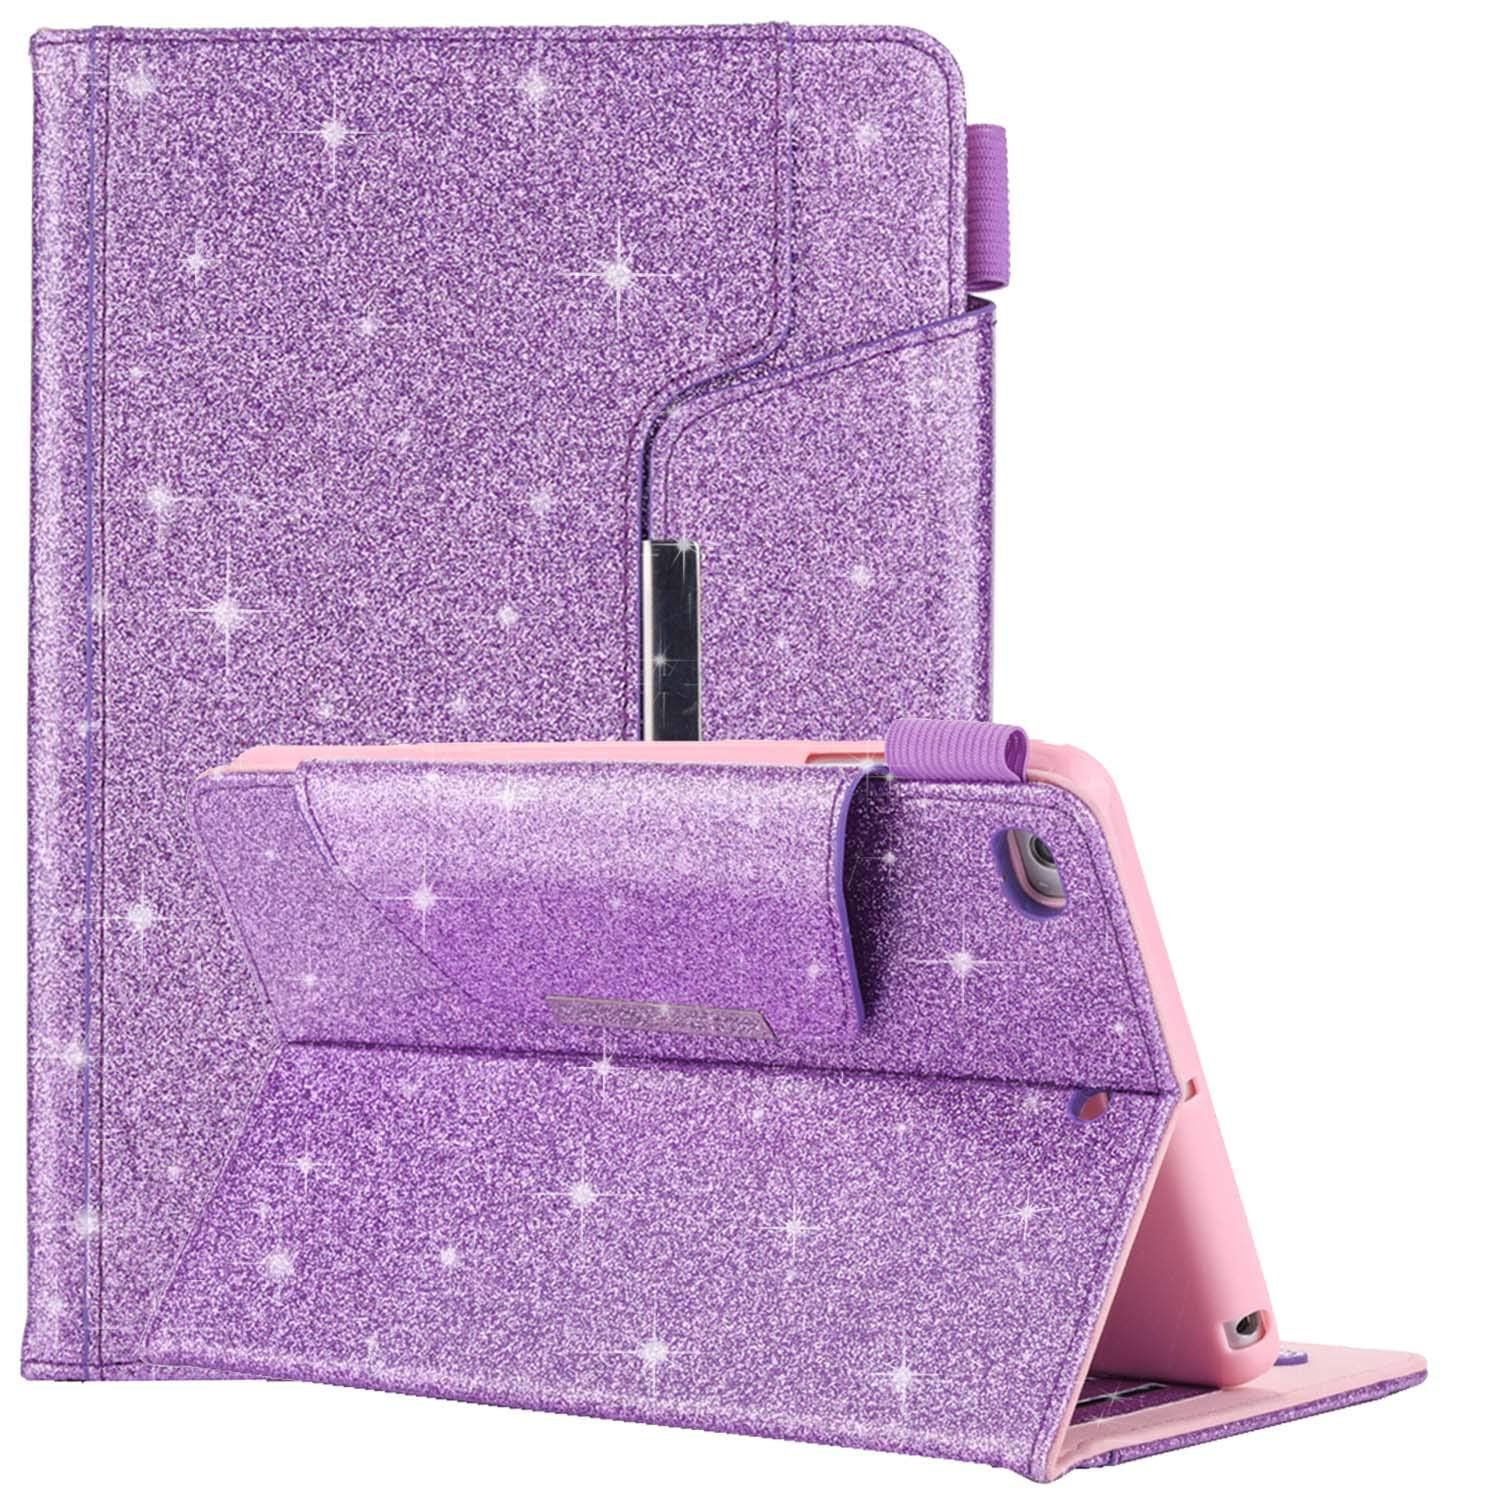 Pink Bling Sparkle PU Leather Smart Cover FANSONG iPad Air/Air2/Pro 9.7/iPad 2017 Glitter Case Flip Stand Function Universal Case for New Apple iPad 2018 Auto Sleep/Wake 